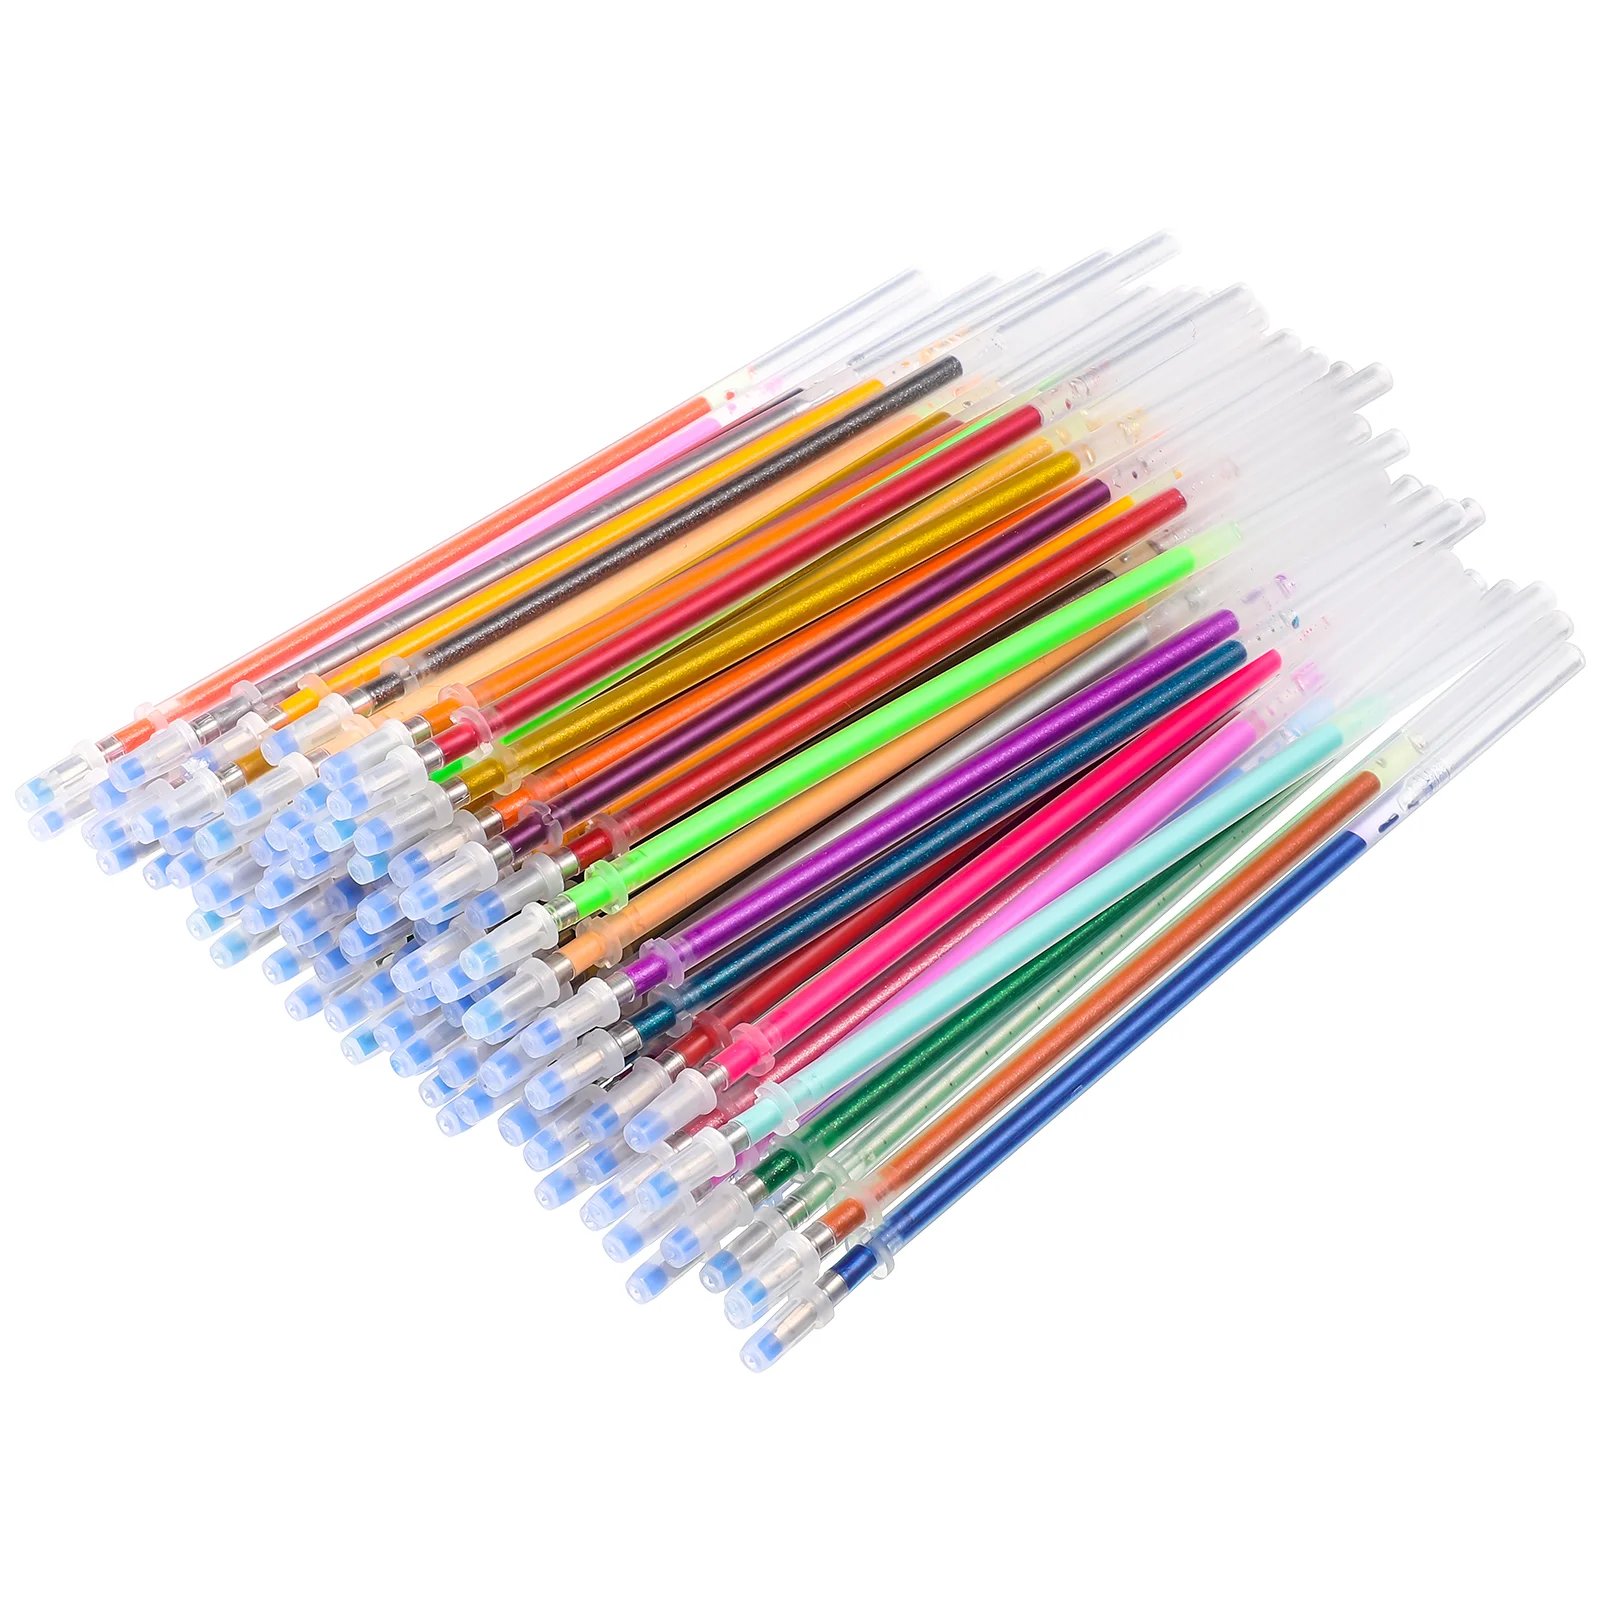 

TOYANDONA 100pcs Colorful Gel Fountain Colored Gel Pens Bullet Pen Refill Student Stationery Office Supplies for Doodling